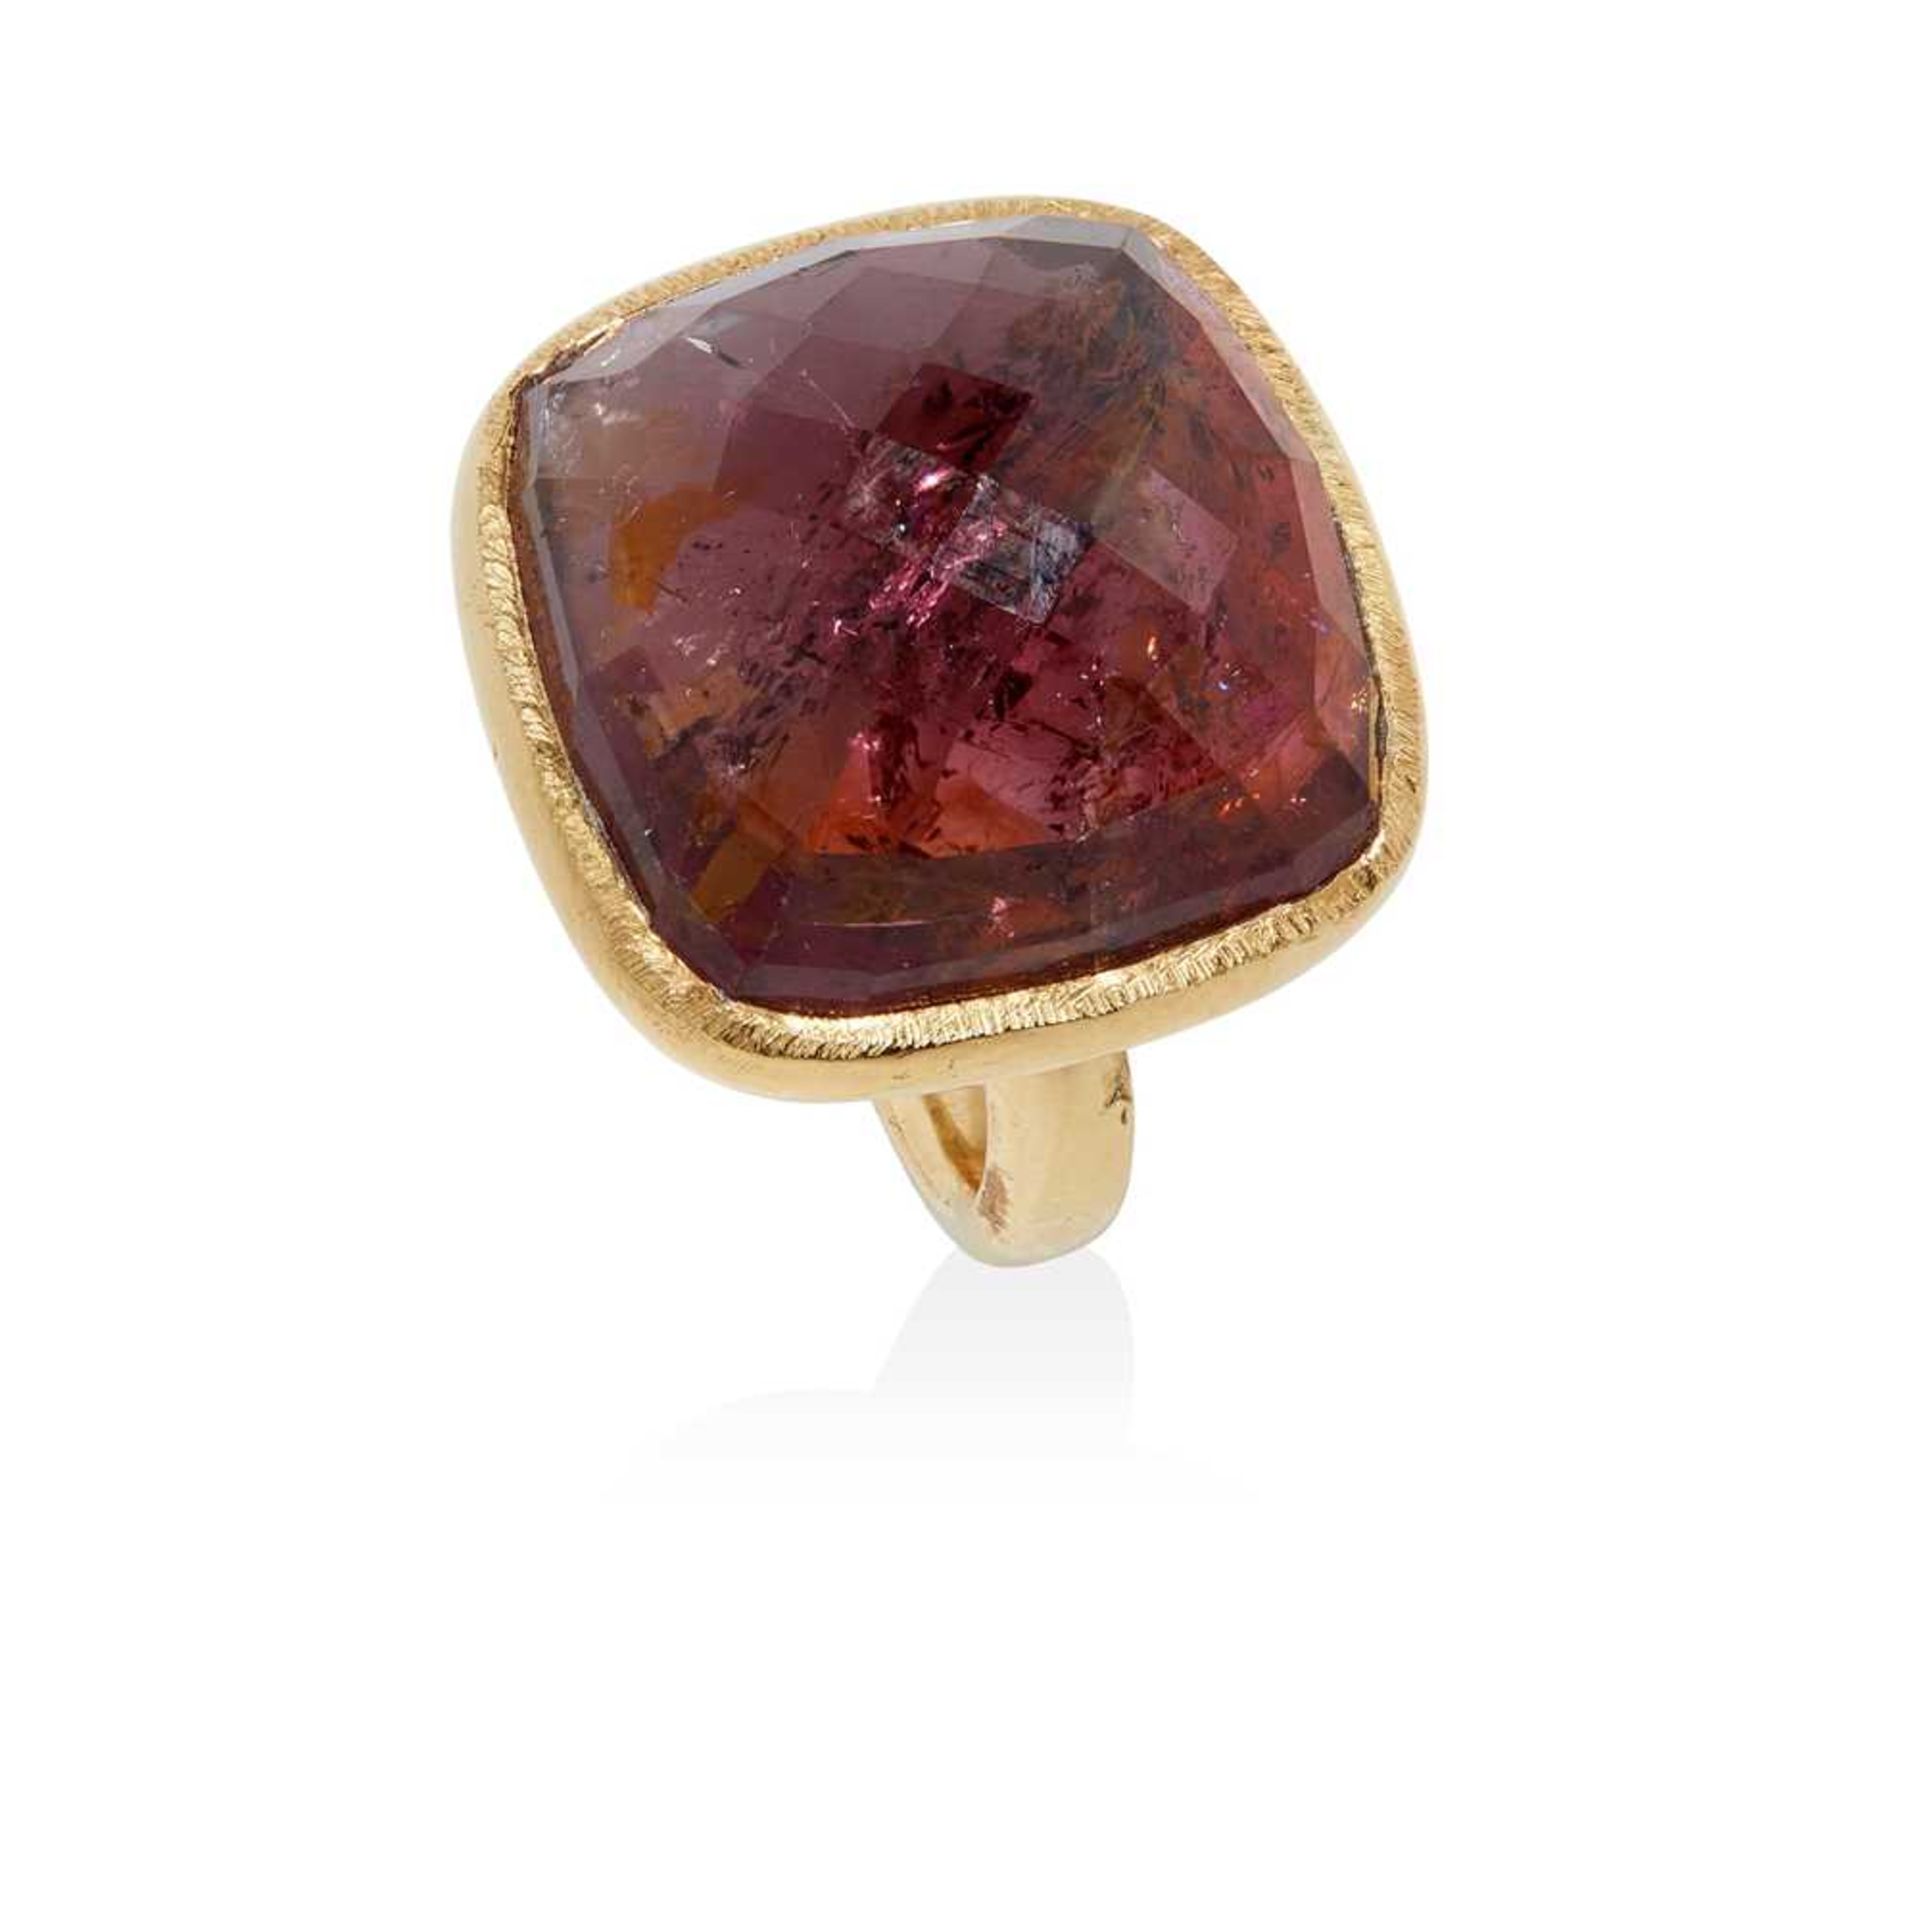 A tourmaline cocktail ring